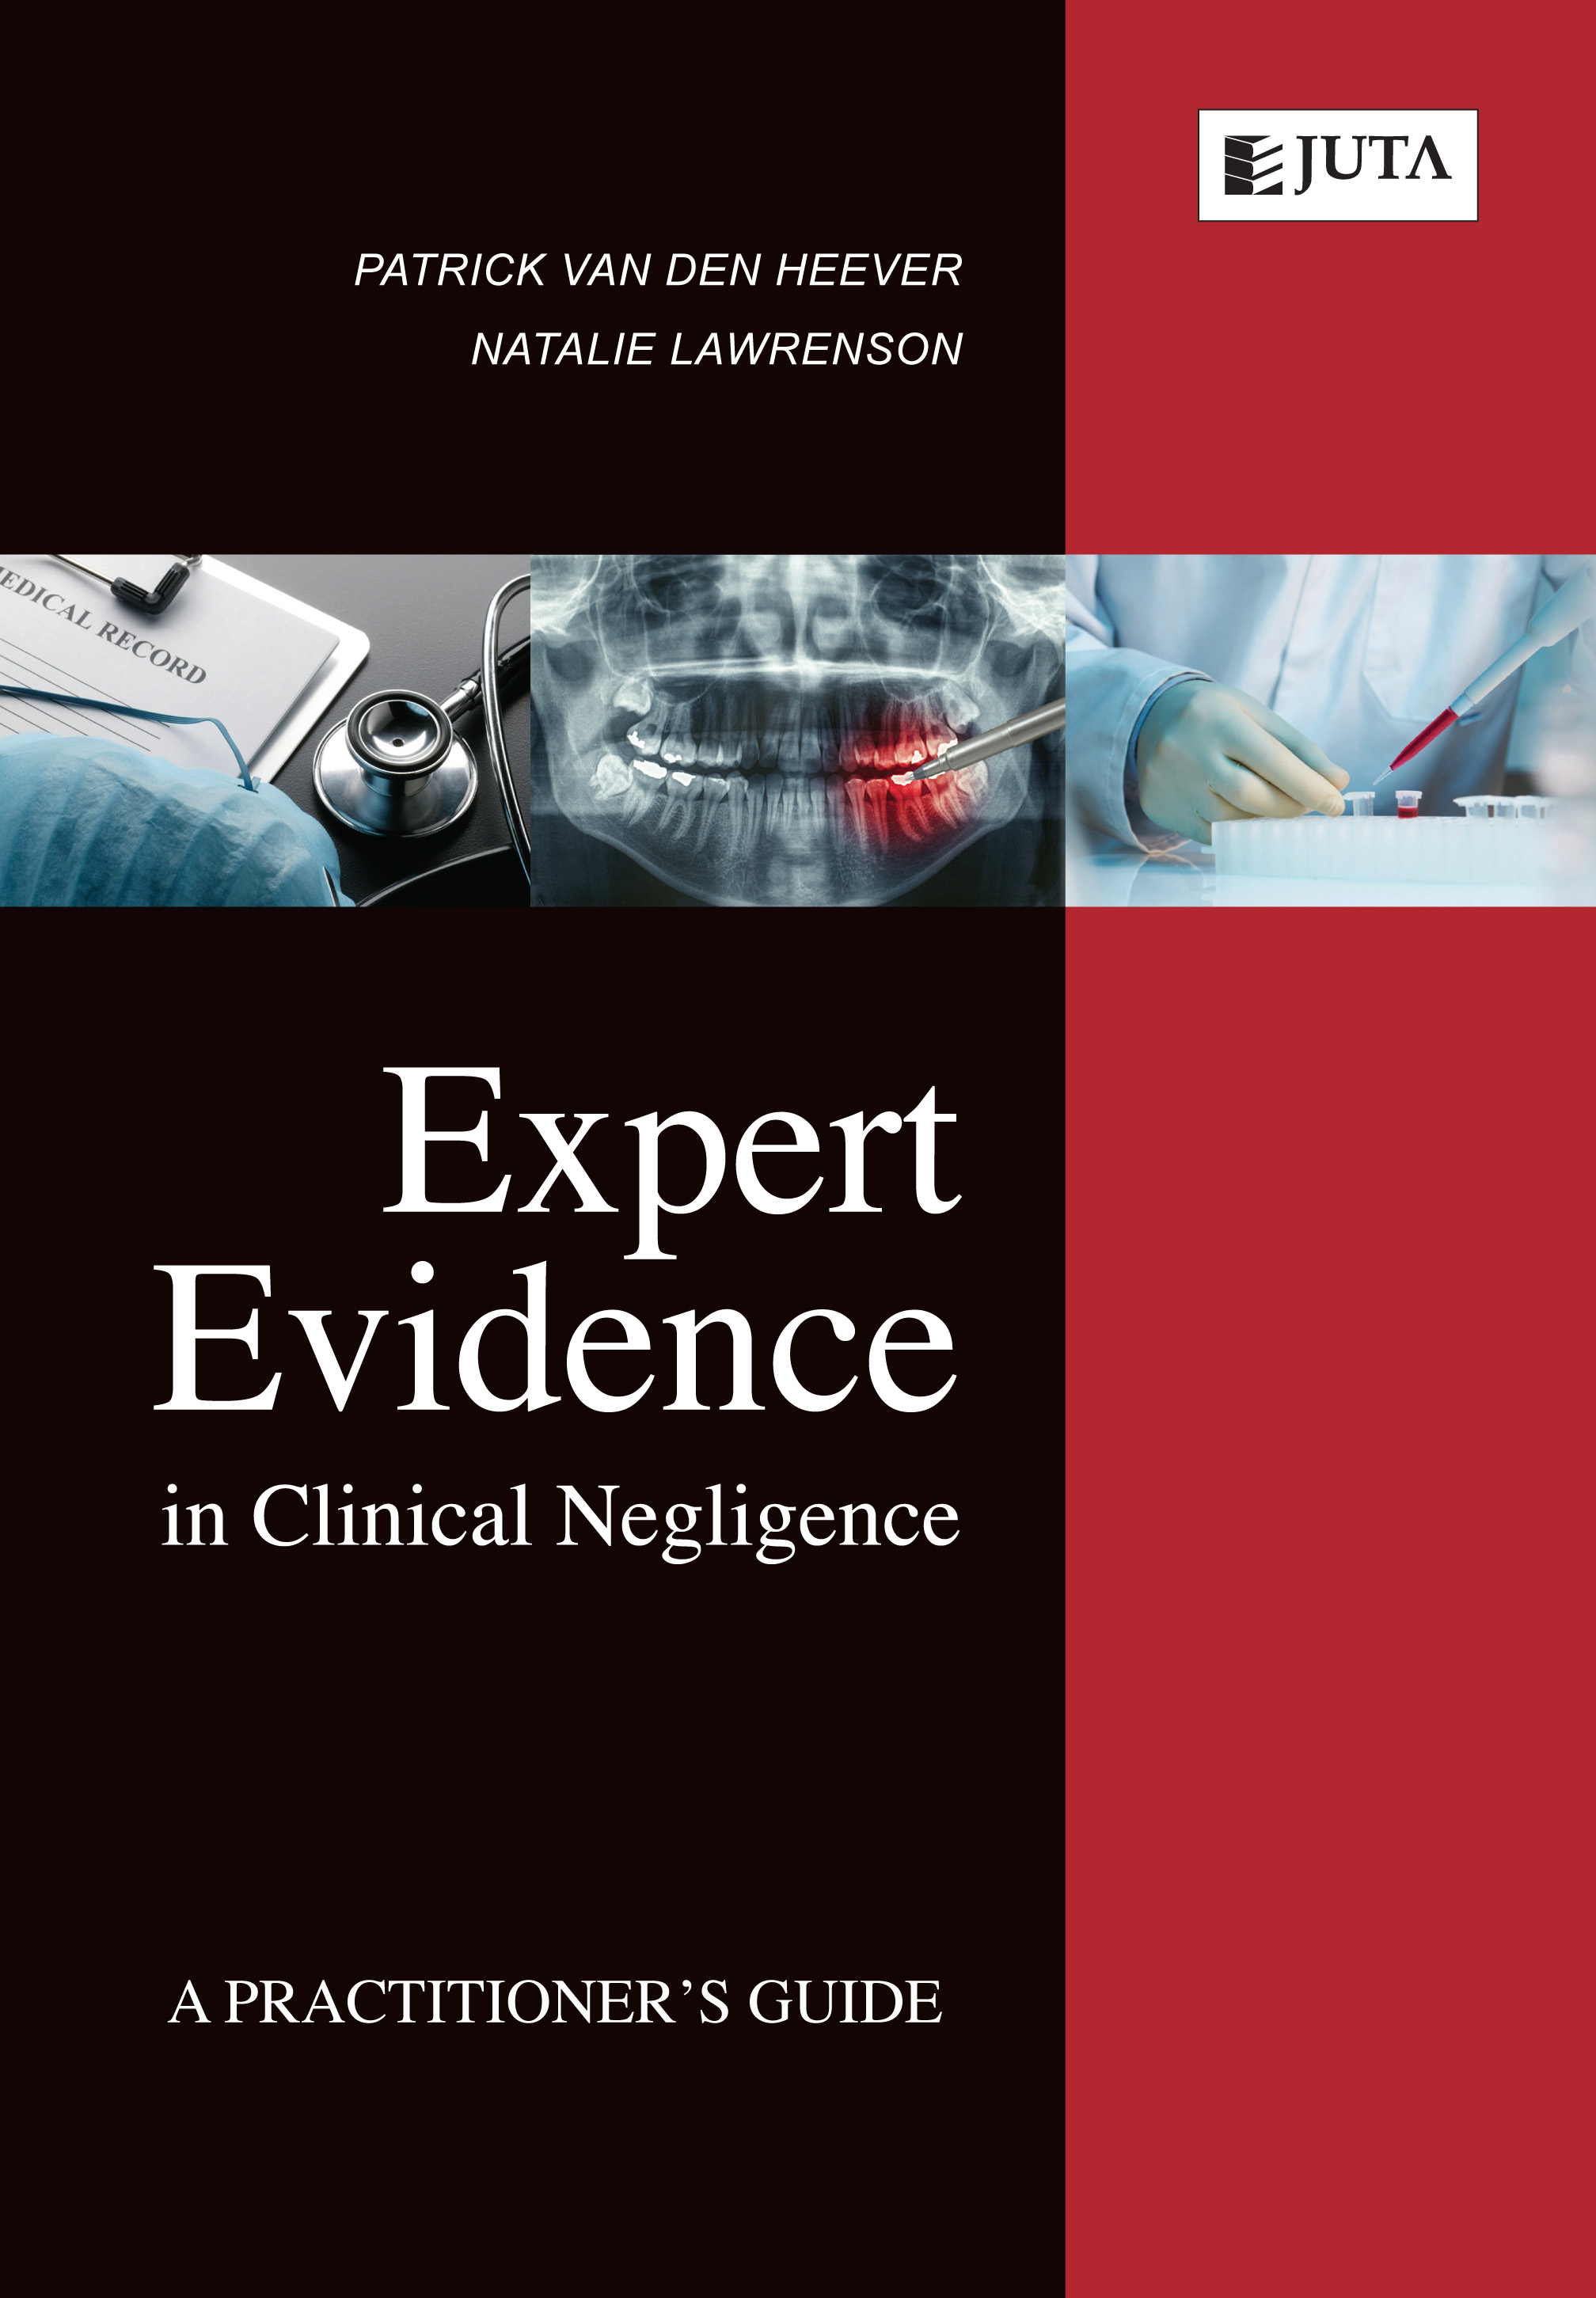 Expert Evidence in Clinical Negligence